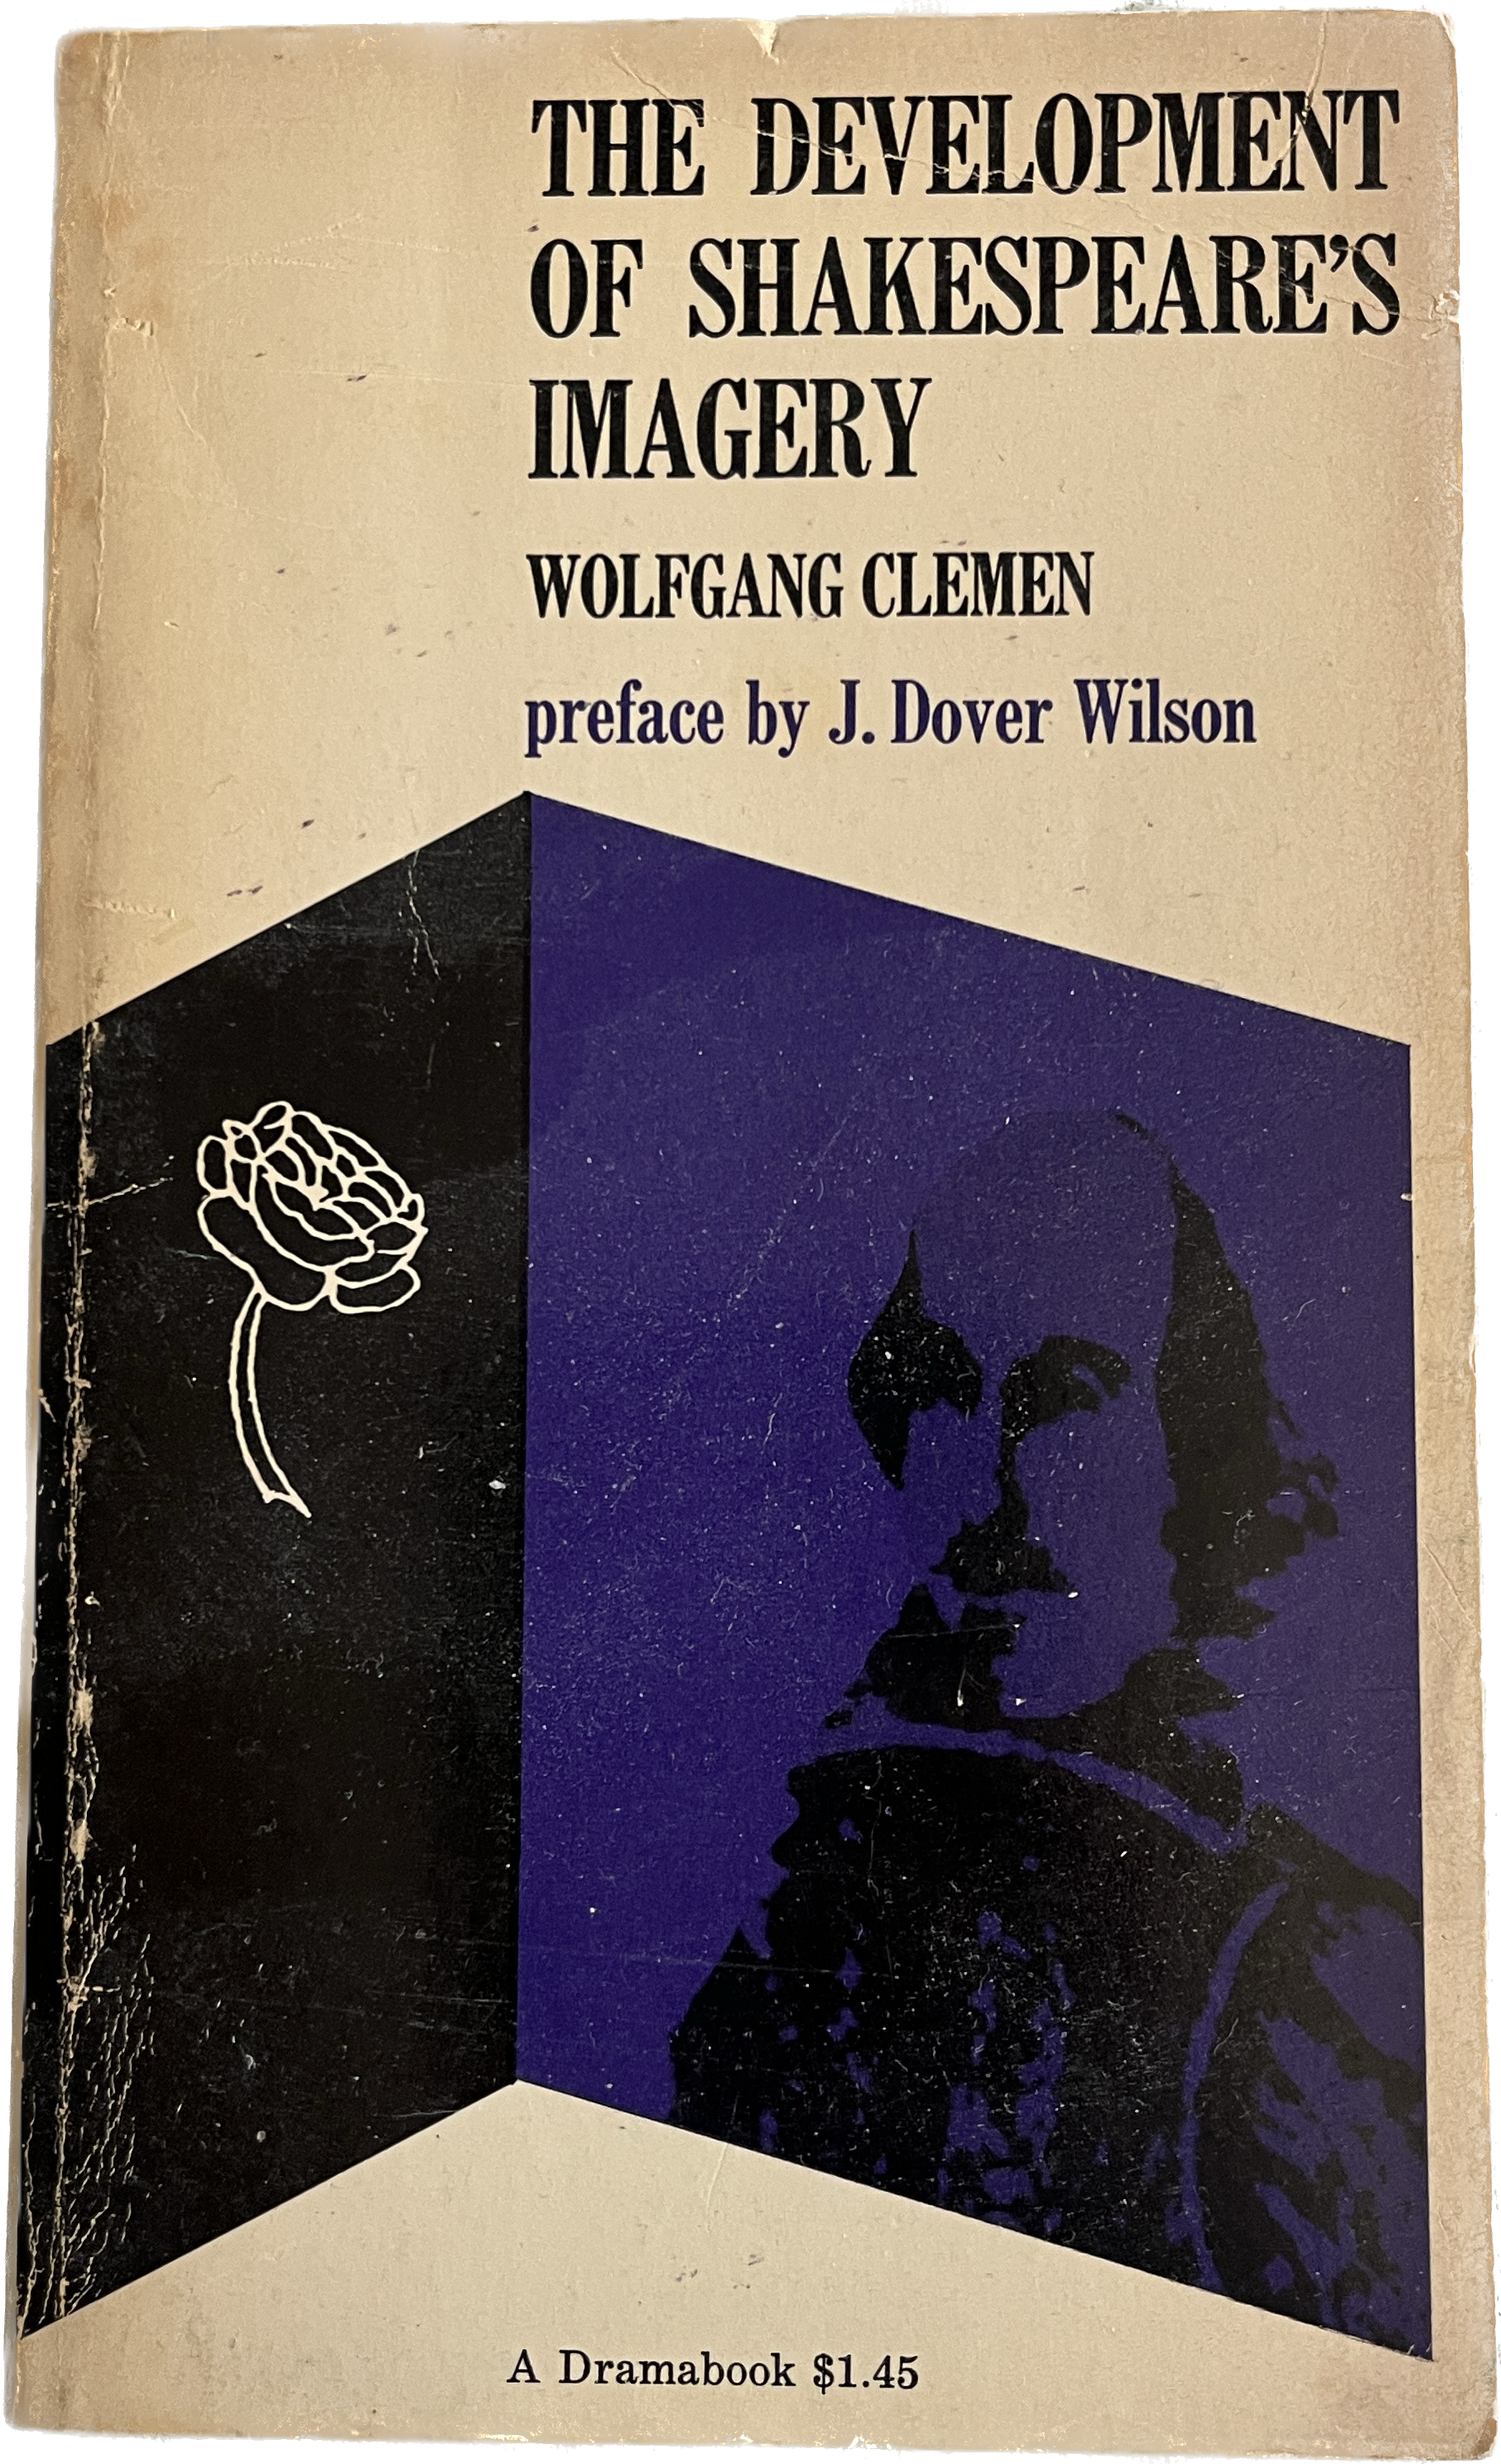 the development of shakespeare's imagery by wolfgang clemen, preface by j. dover wilson